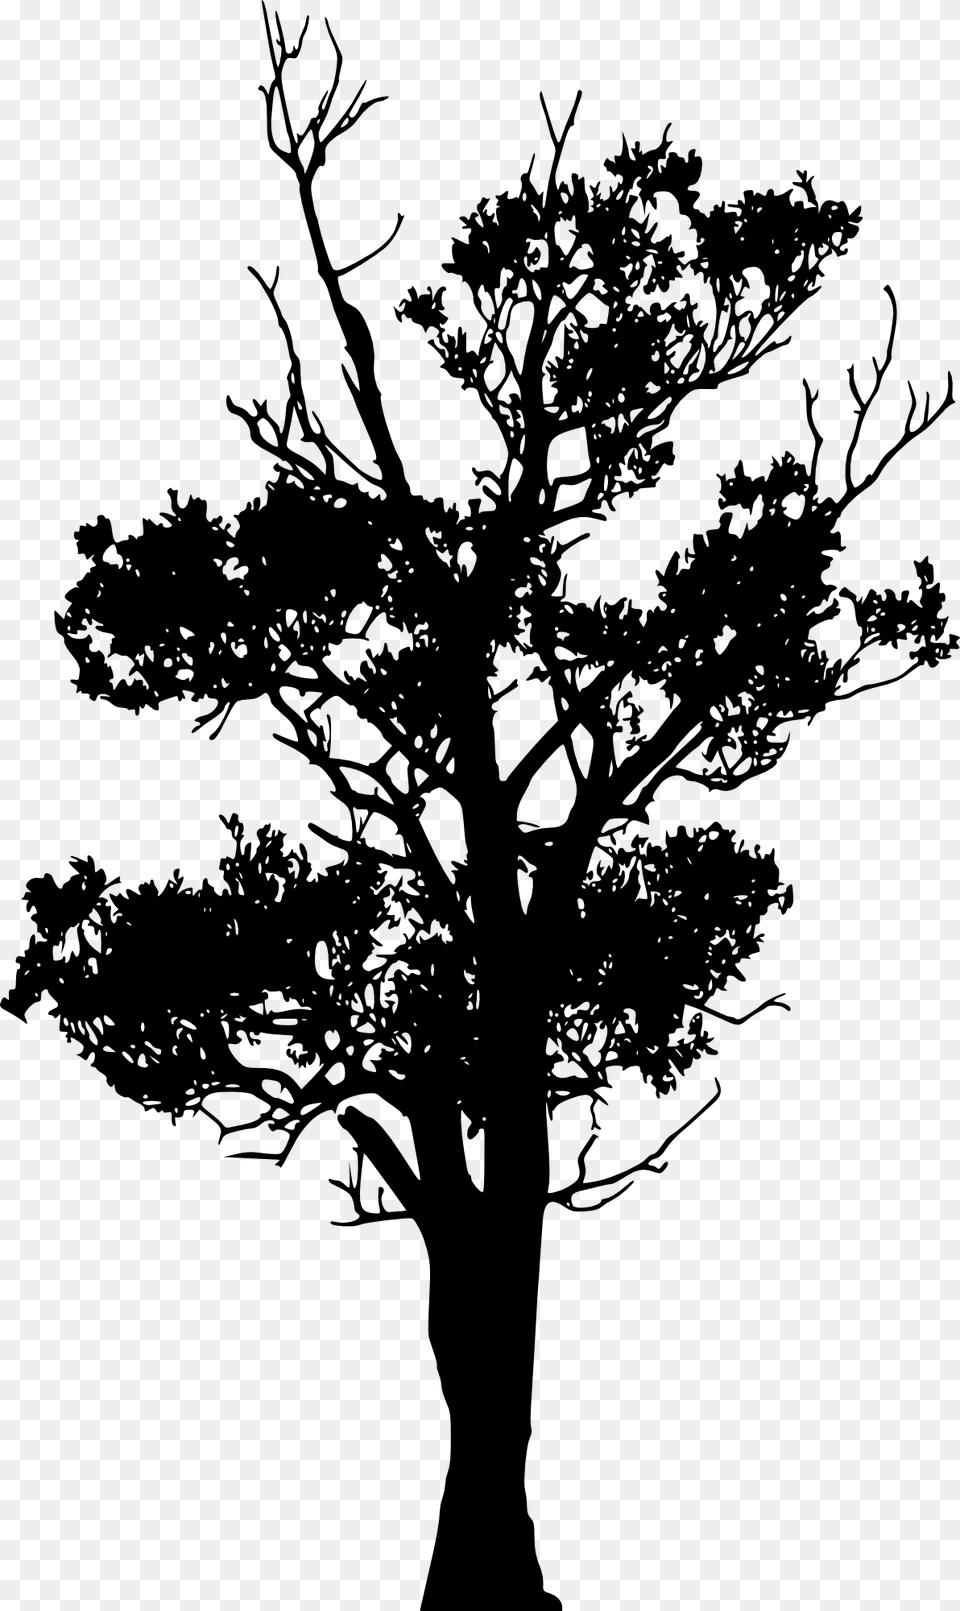 Tree Silhouettes Transparent Background Portable Network Graphics, Plant, Silhouette, Stencil, Art Png Image